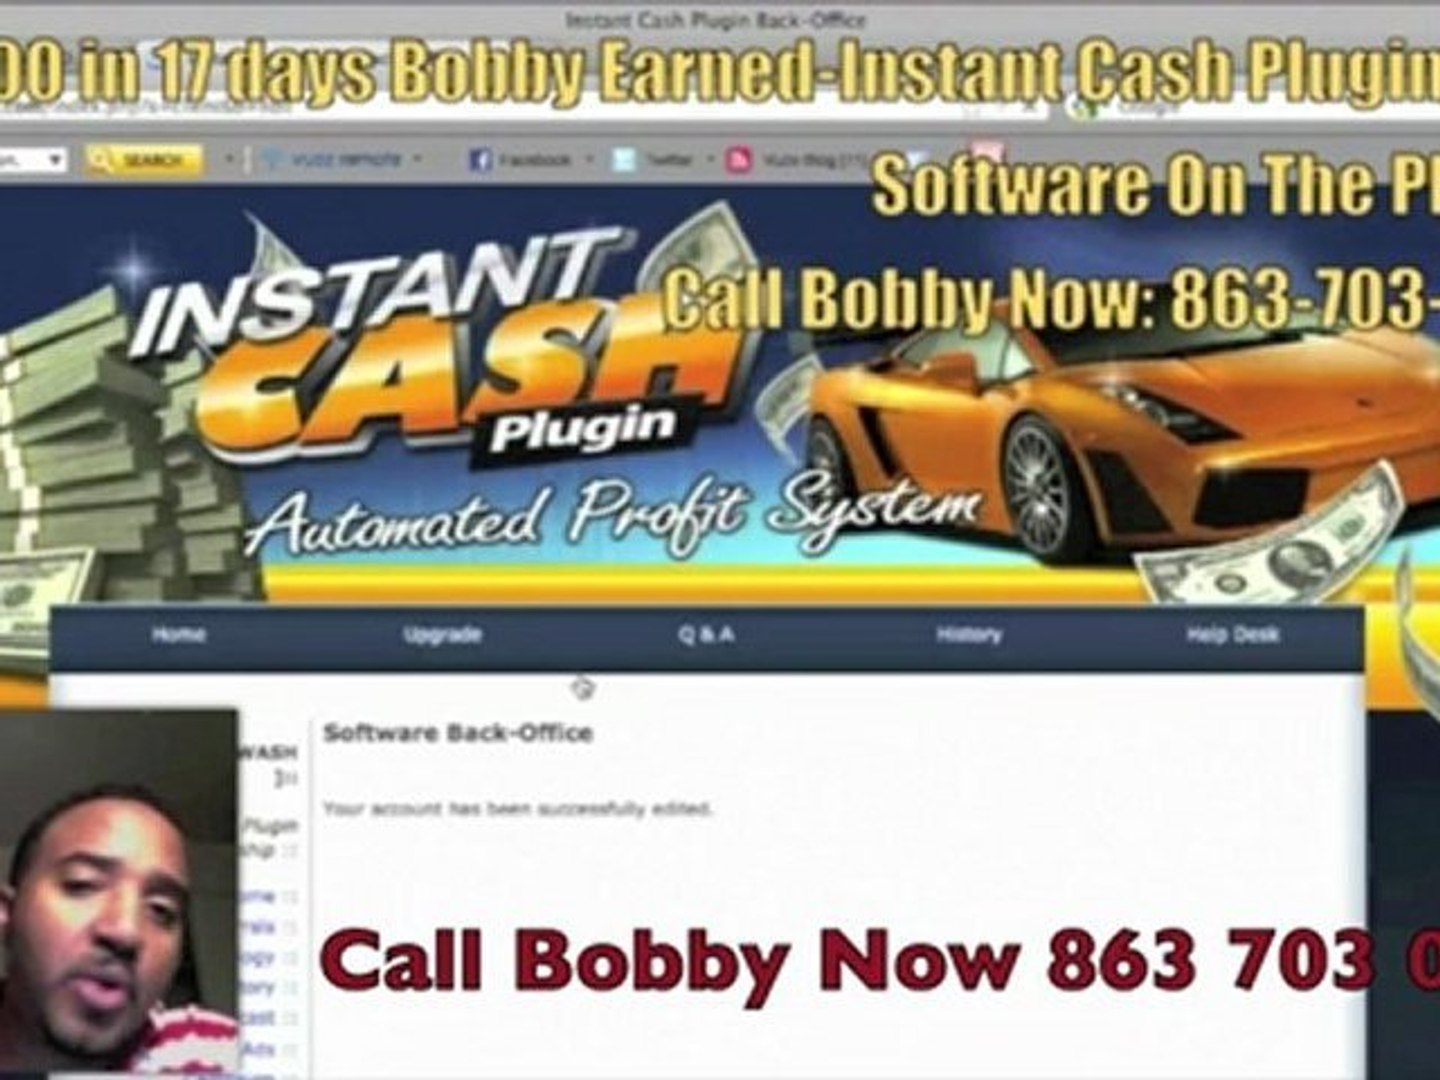 ICP Micro - Instant Cash Plugin - Bobby Earned 14 Thousand in 17 days